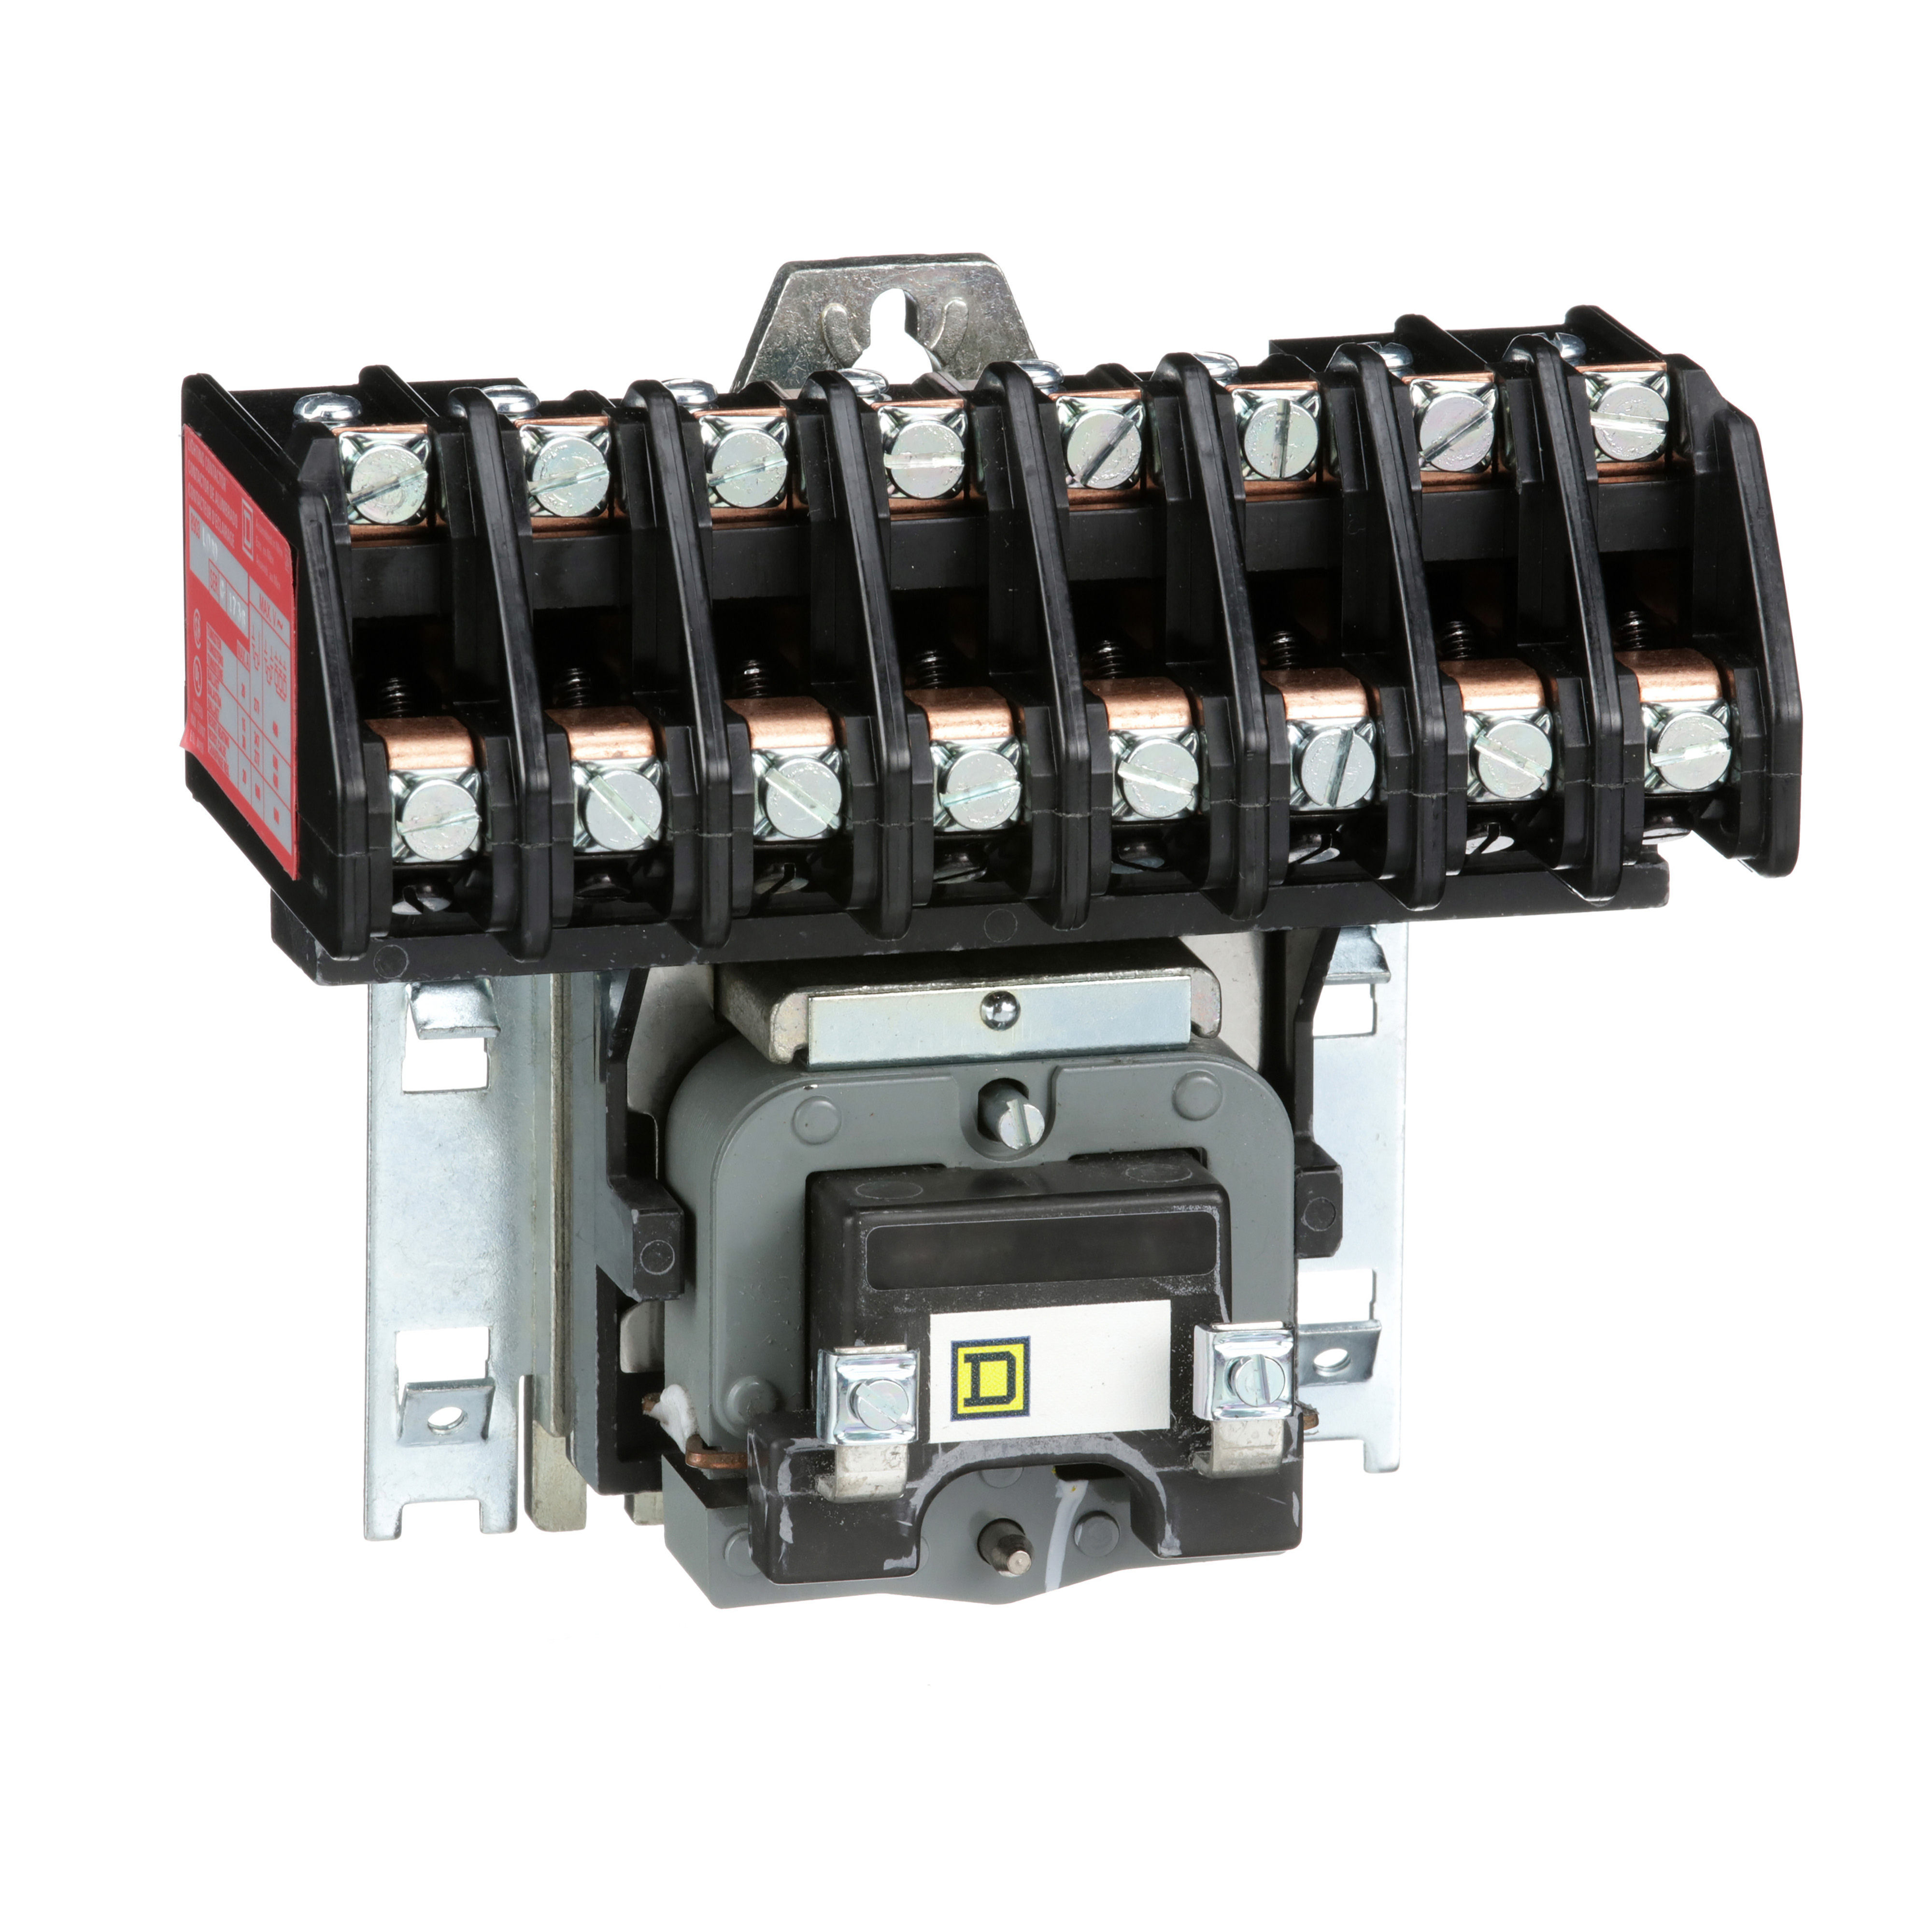 Contactor, Type L, multipole lighting, electrically held, 30A, 8 pole, 600 V, 208 VAC 60 Hz coil, open style